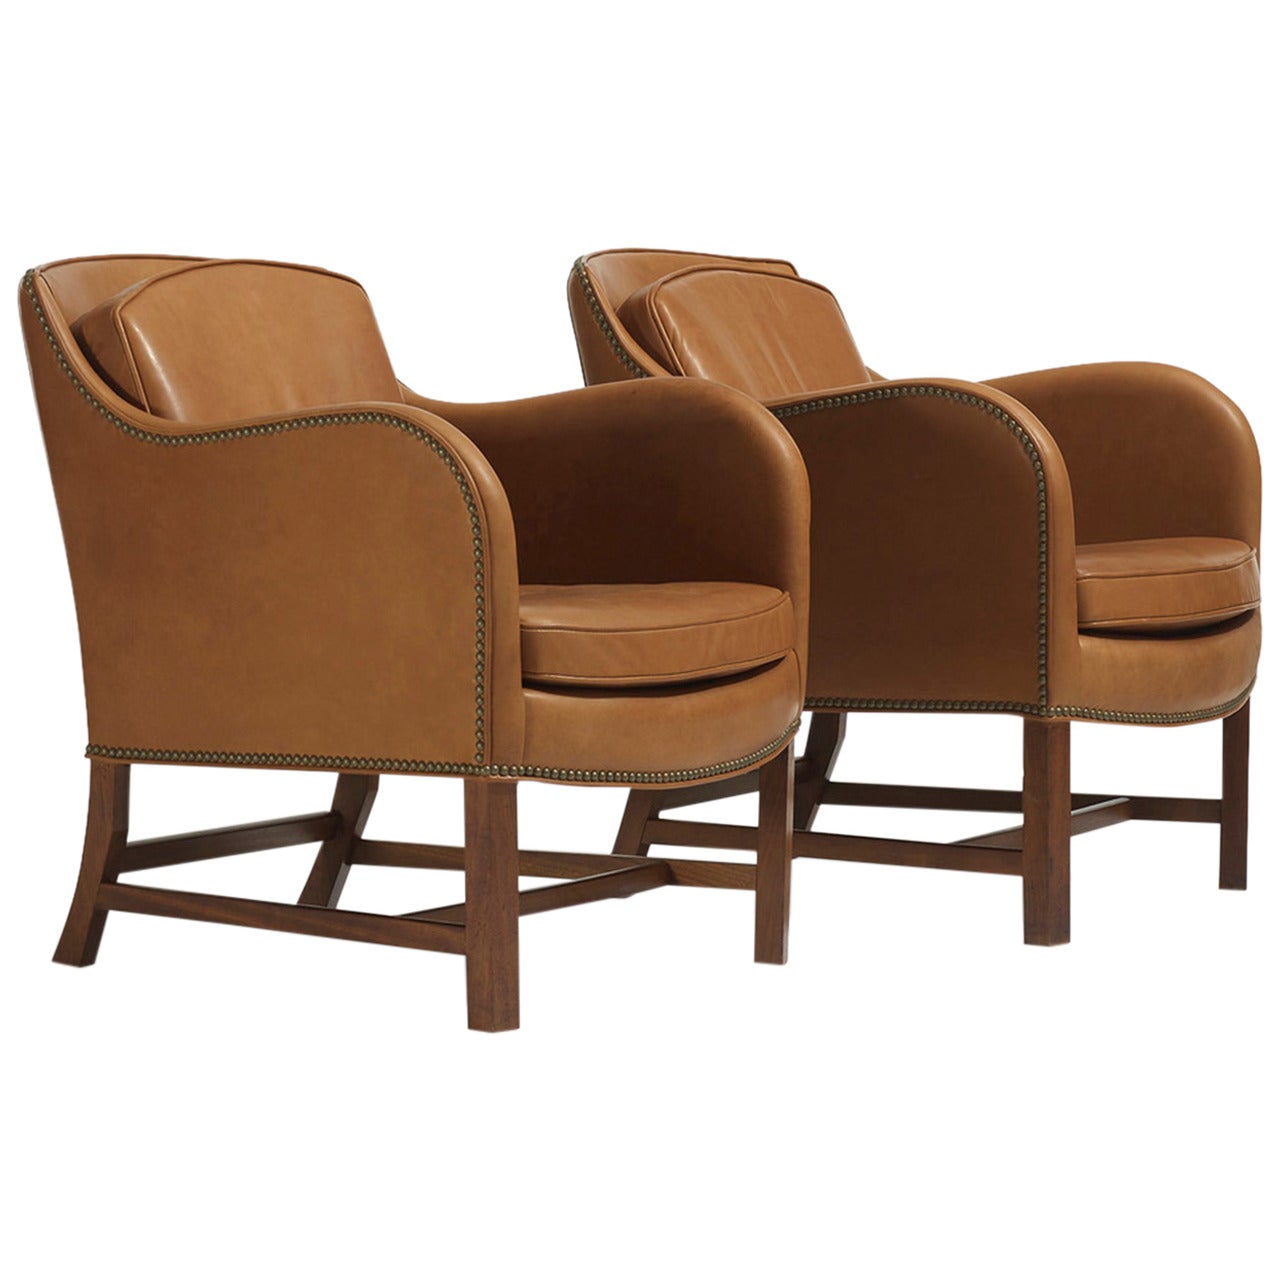 Mix Lounge Chairs Model 4396, Pair by Edvard Kindt-Larsen and Kaare Klint For Sale